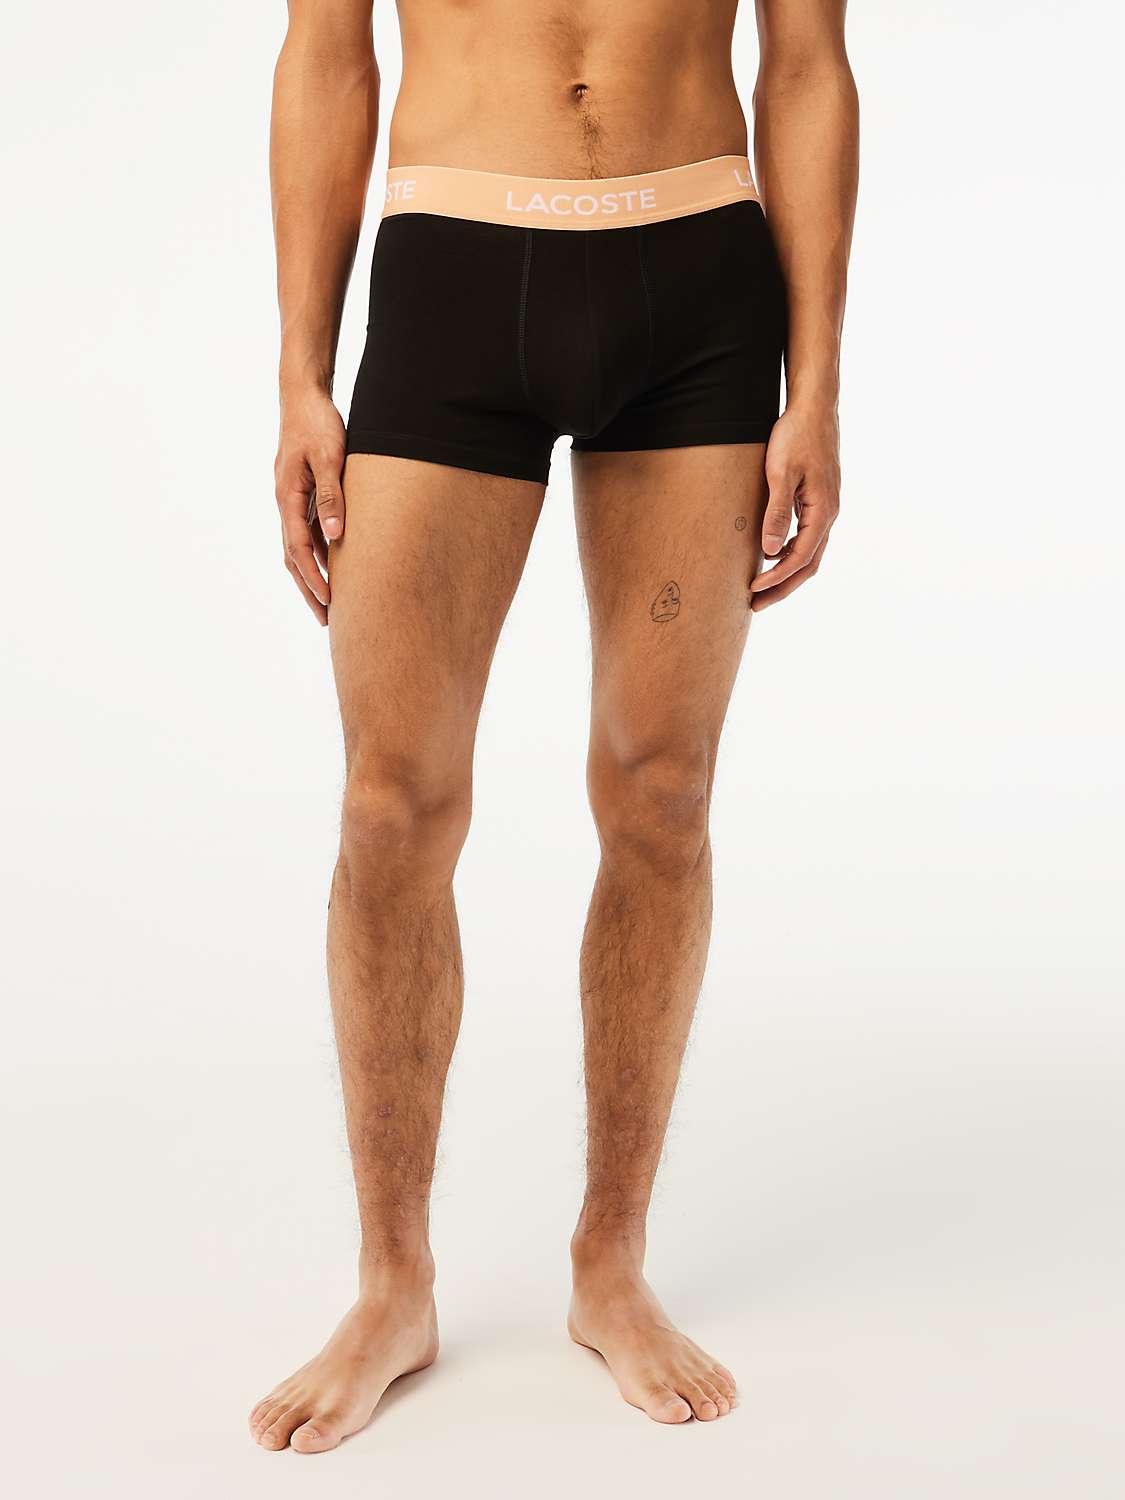 Buy Lacoste Contrast Waistband Trunks, Pack of 5, Black/Multi Online at johnlewis.com